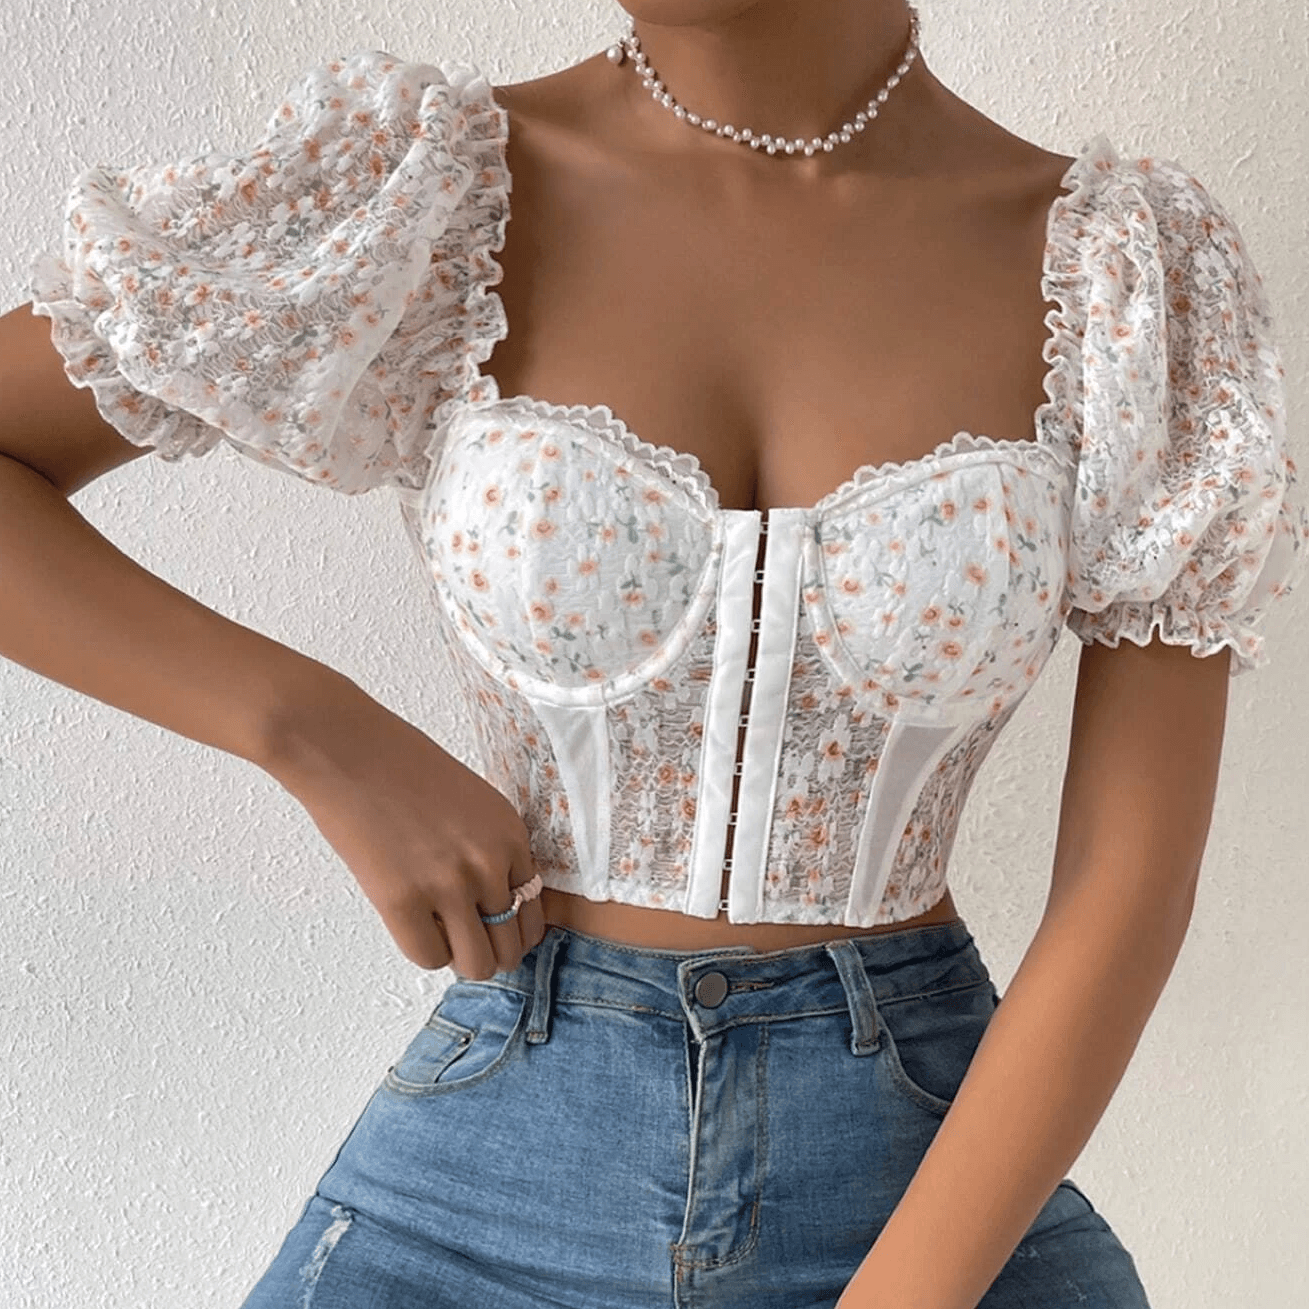 Cassie Sweetheart Floral Hook And Eye Crop Top - Hot fashionista